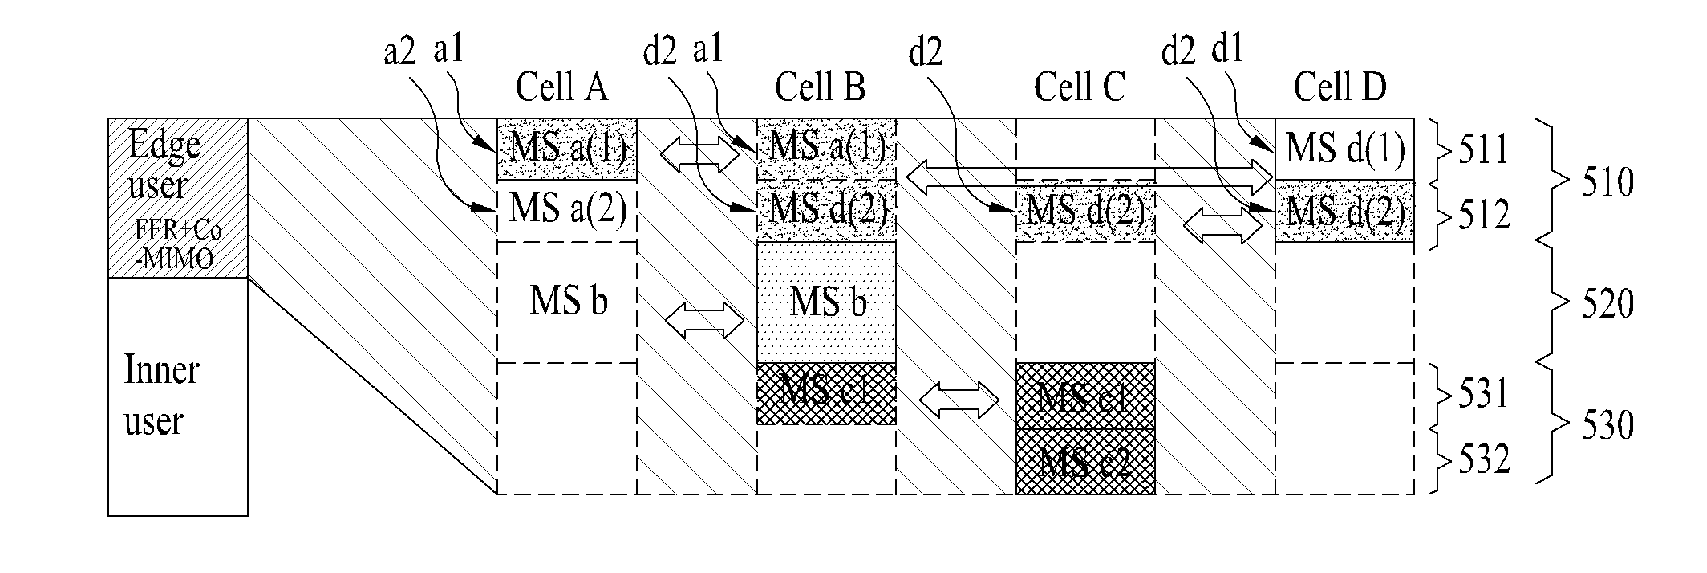 Method for Allocating Resources for Edge-Users Cooperative Mimo